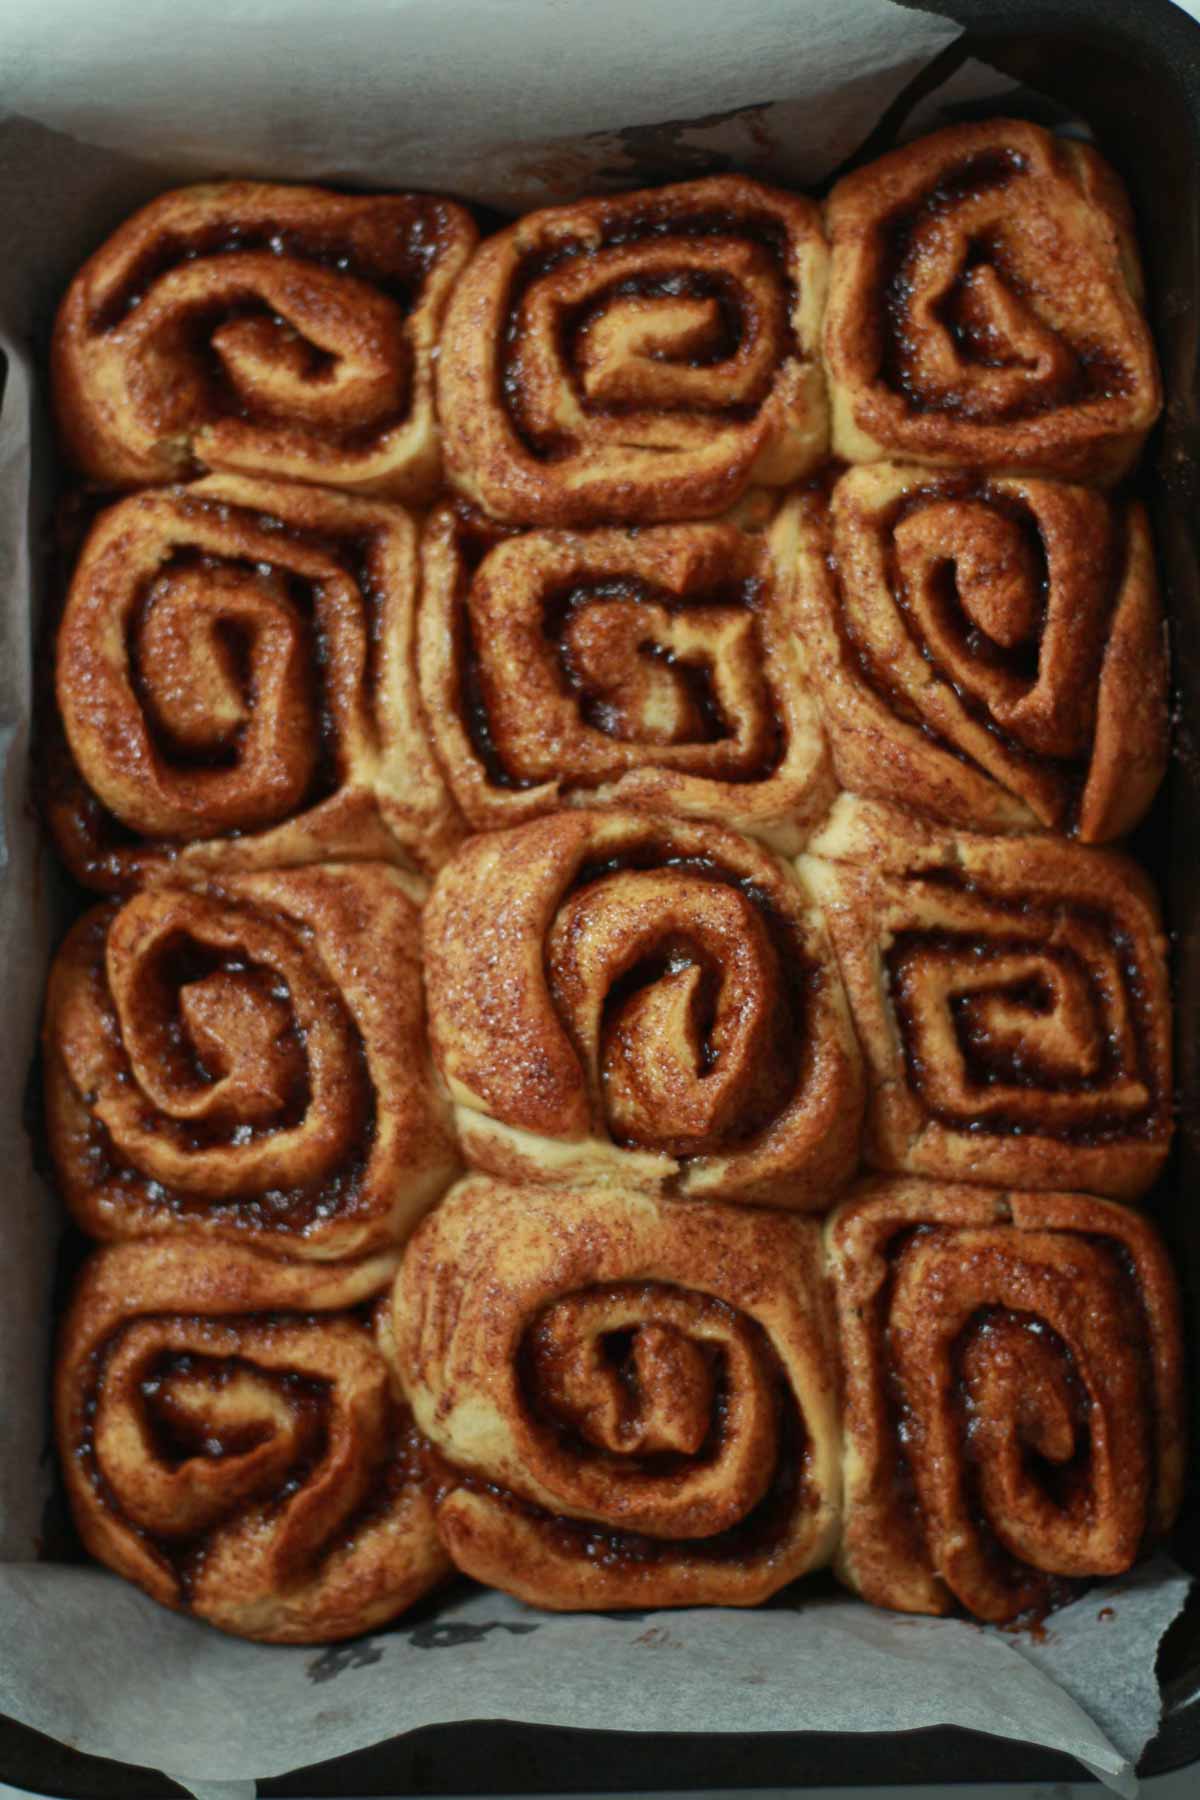 Picture Of Freshly Baked Cinnamon Rolls In Tin